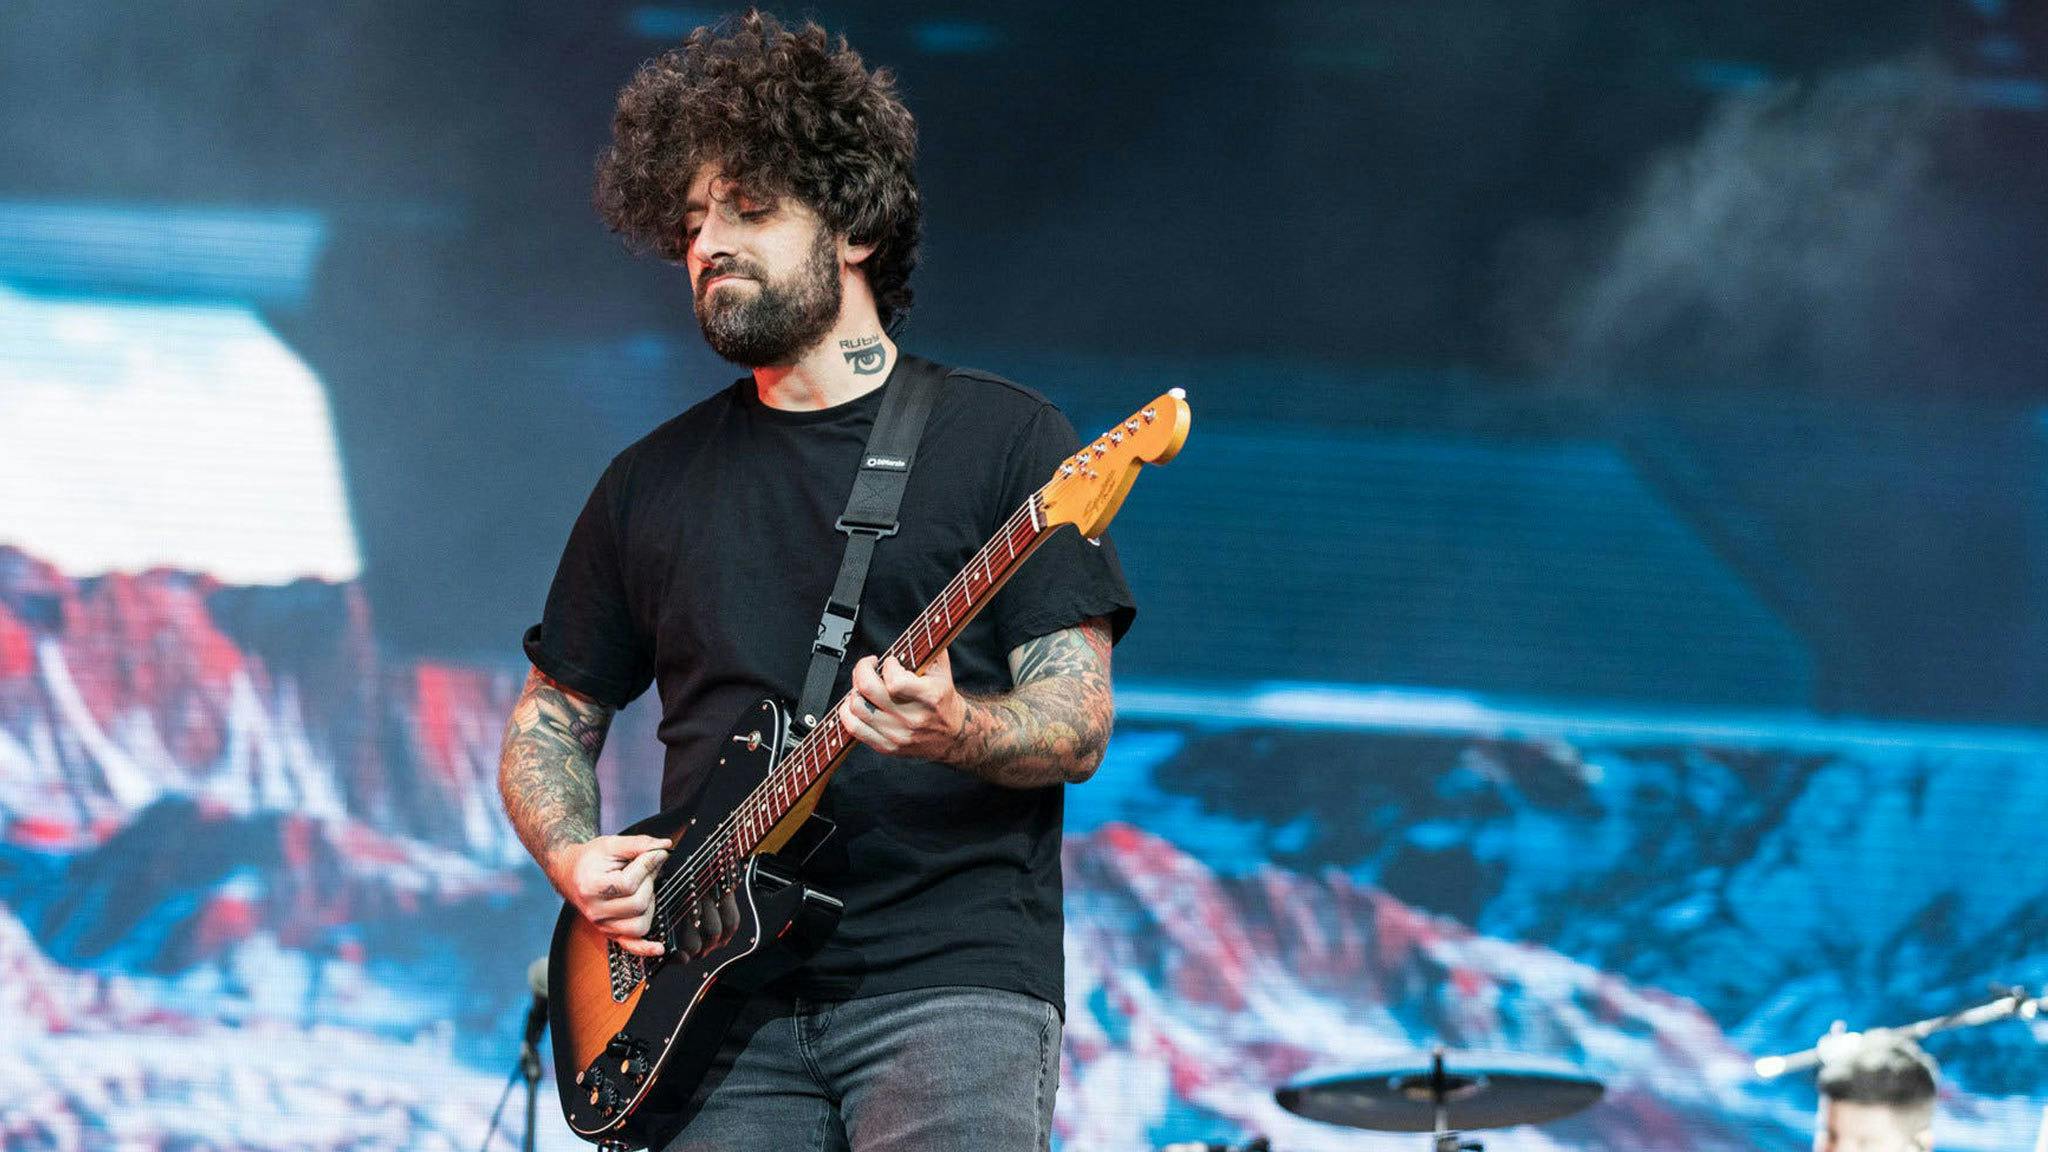 Joe Trohman to take a break from Fall Out Boy to focus on his mental health